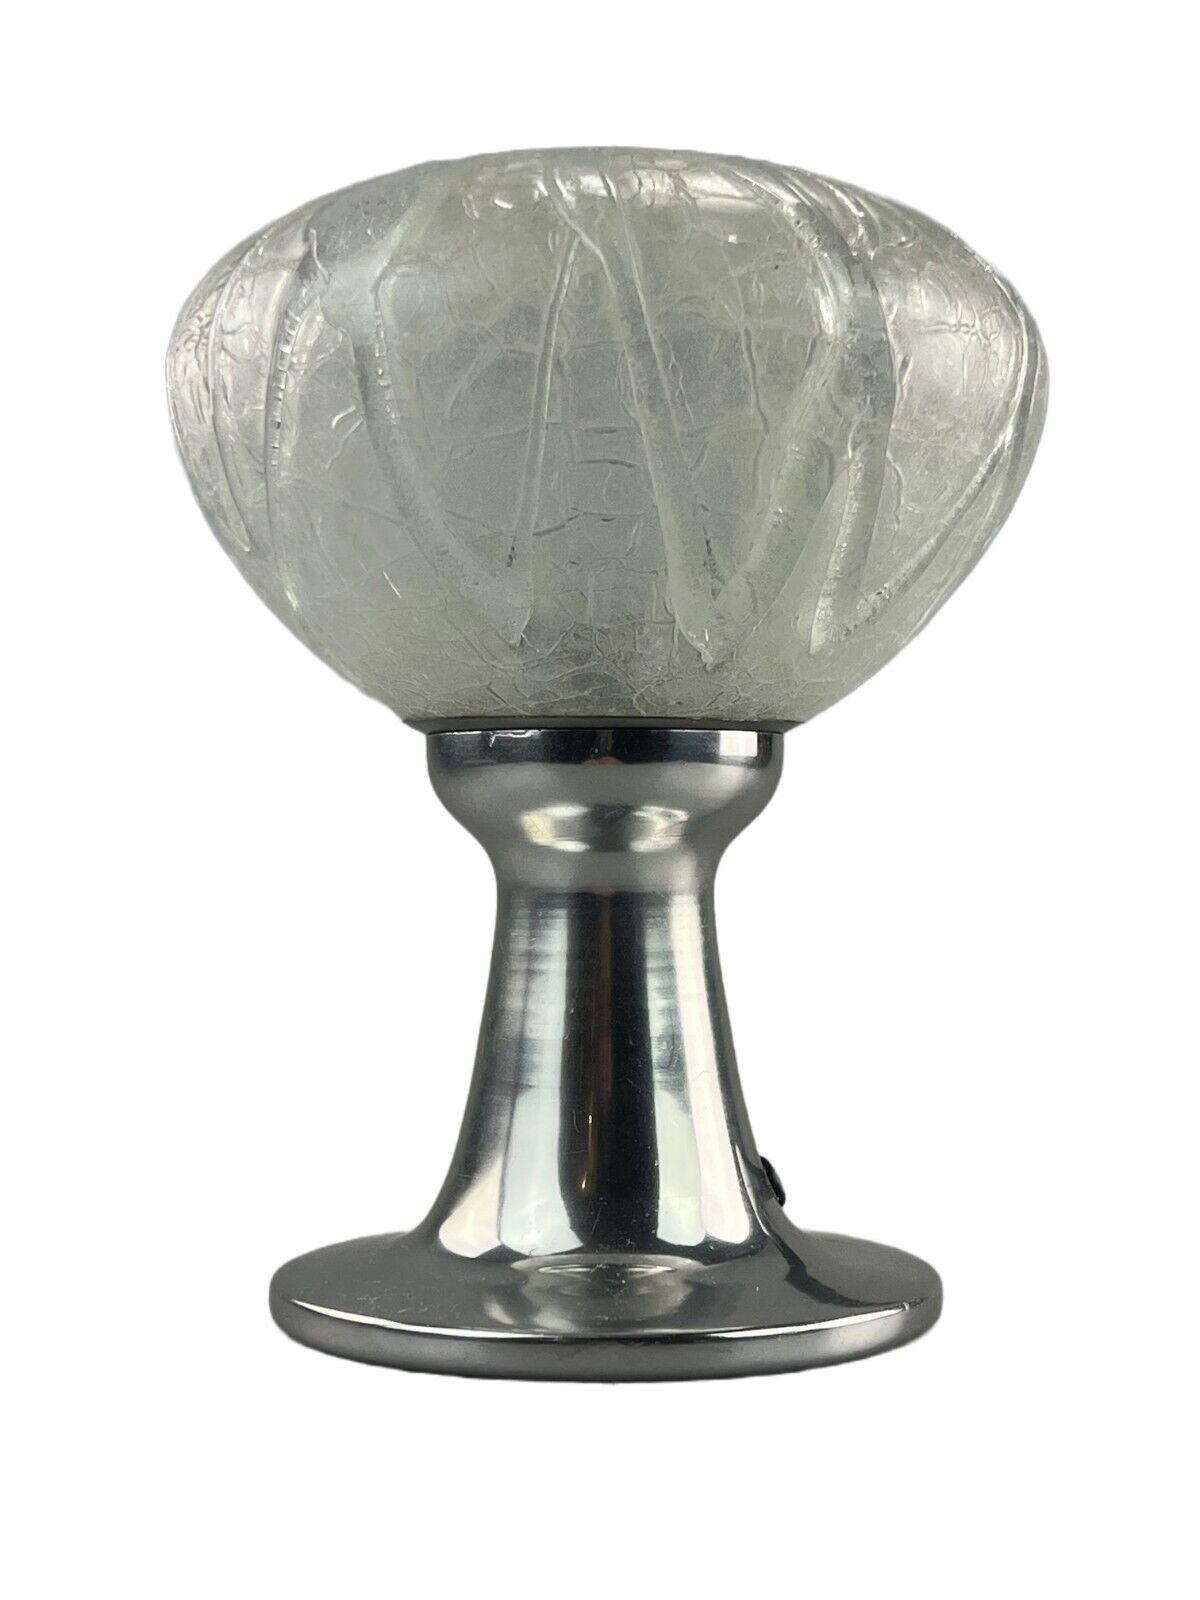 60s 70s table lamp bedside lamp chrome Doria glass space age design

Object: table lamp

Manufacturer: Doria

Condition: good

Age: around 1960-1970

Dimensions:

Diameter = 17.5cm
Height = 22.5cm

Other notes:

E14 socket

The